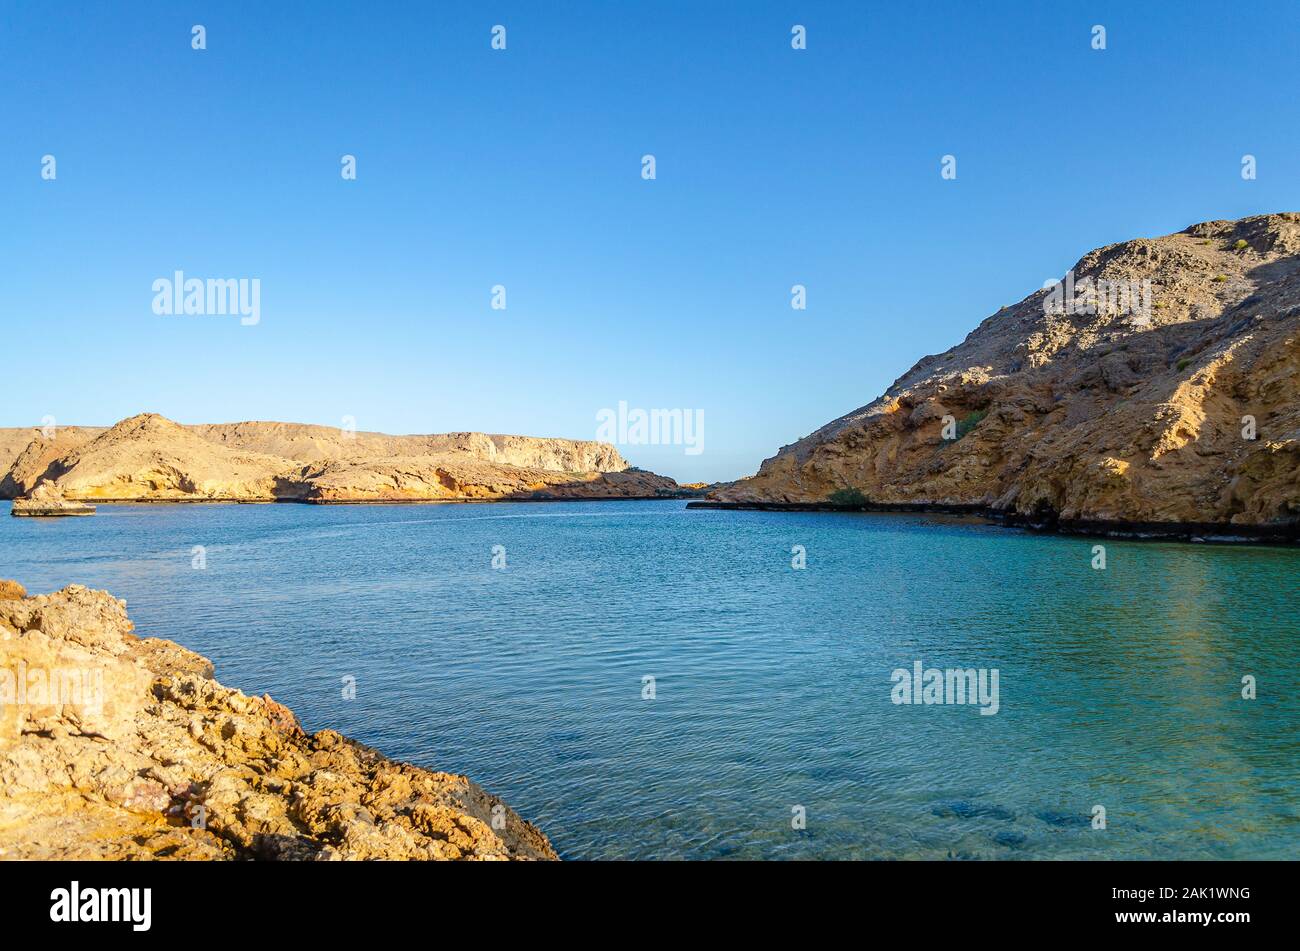 Beautiful view of a very calm sea and beach in Muscat, Oman. Stock Photo